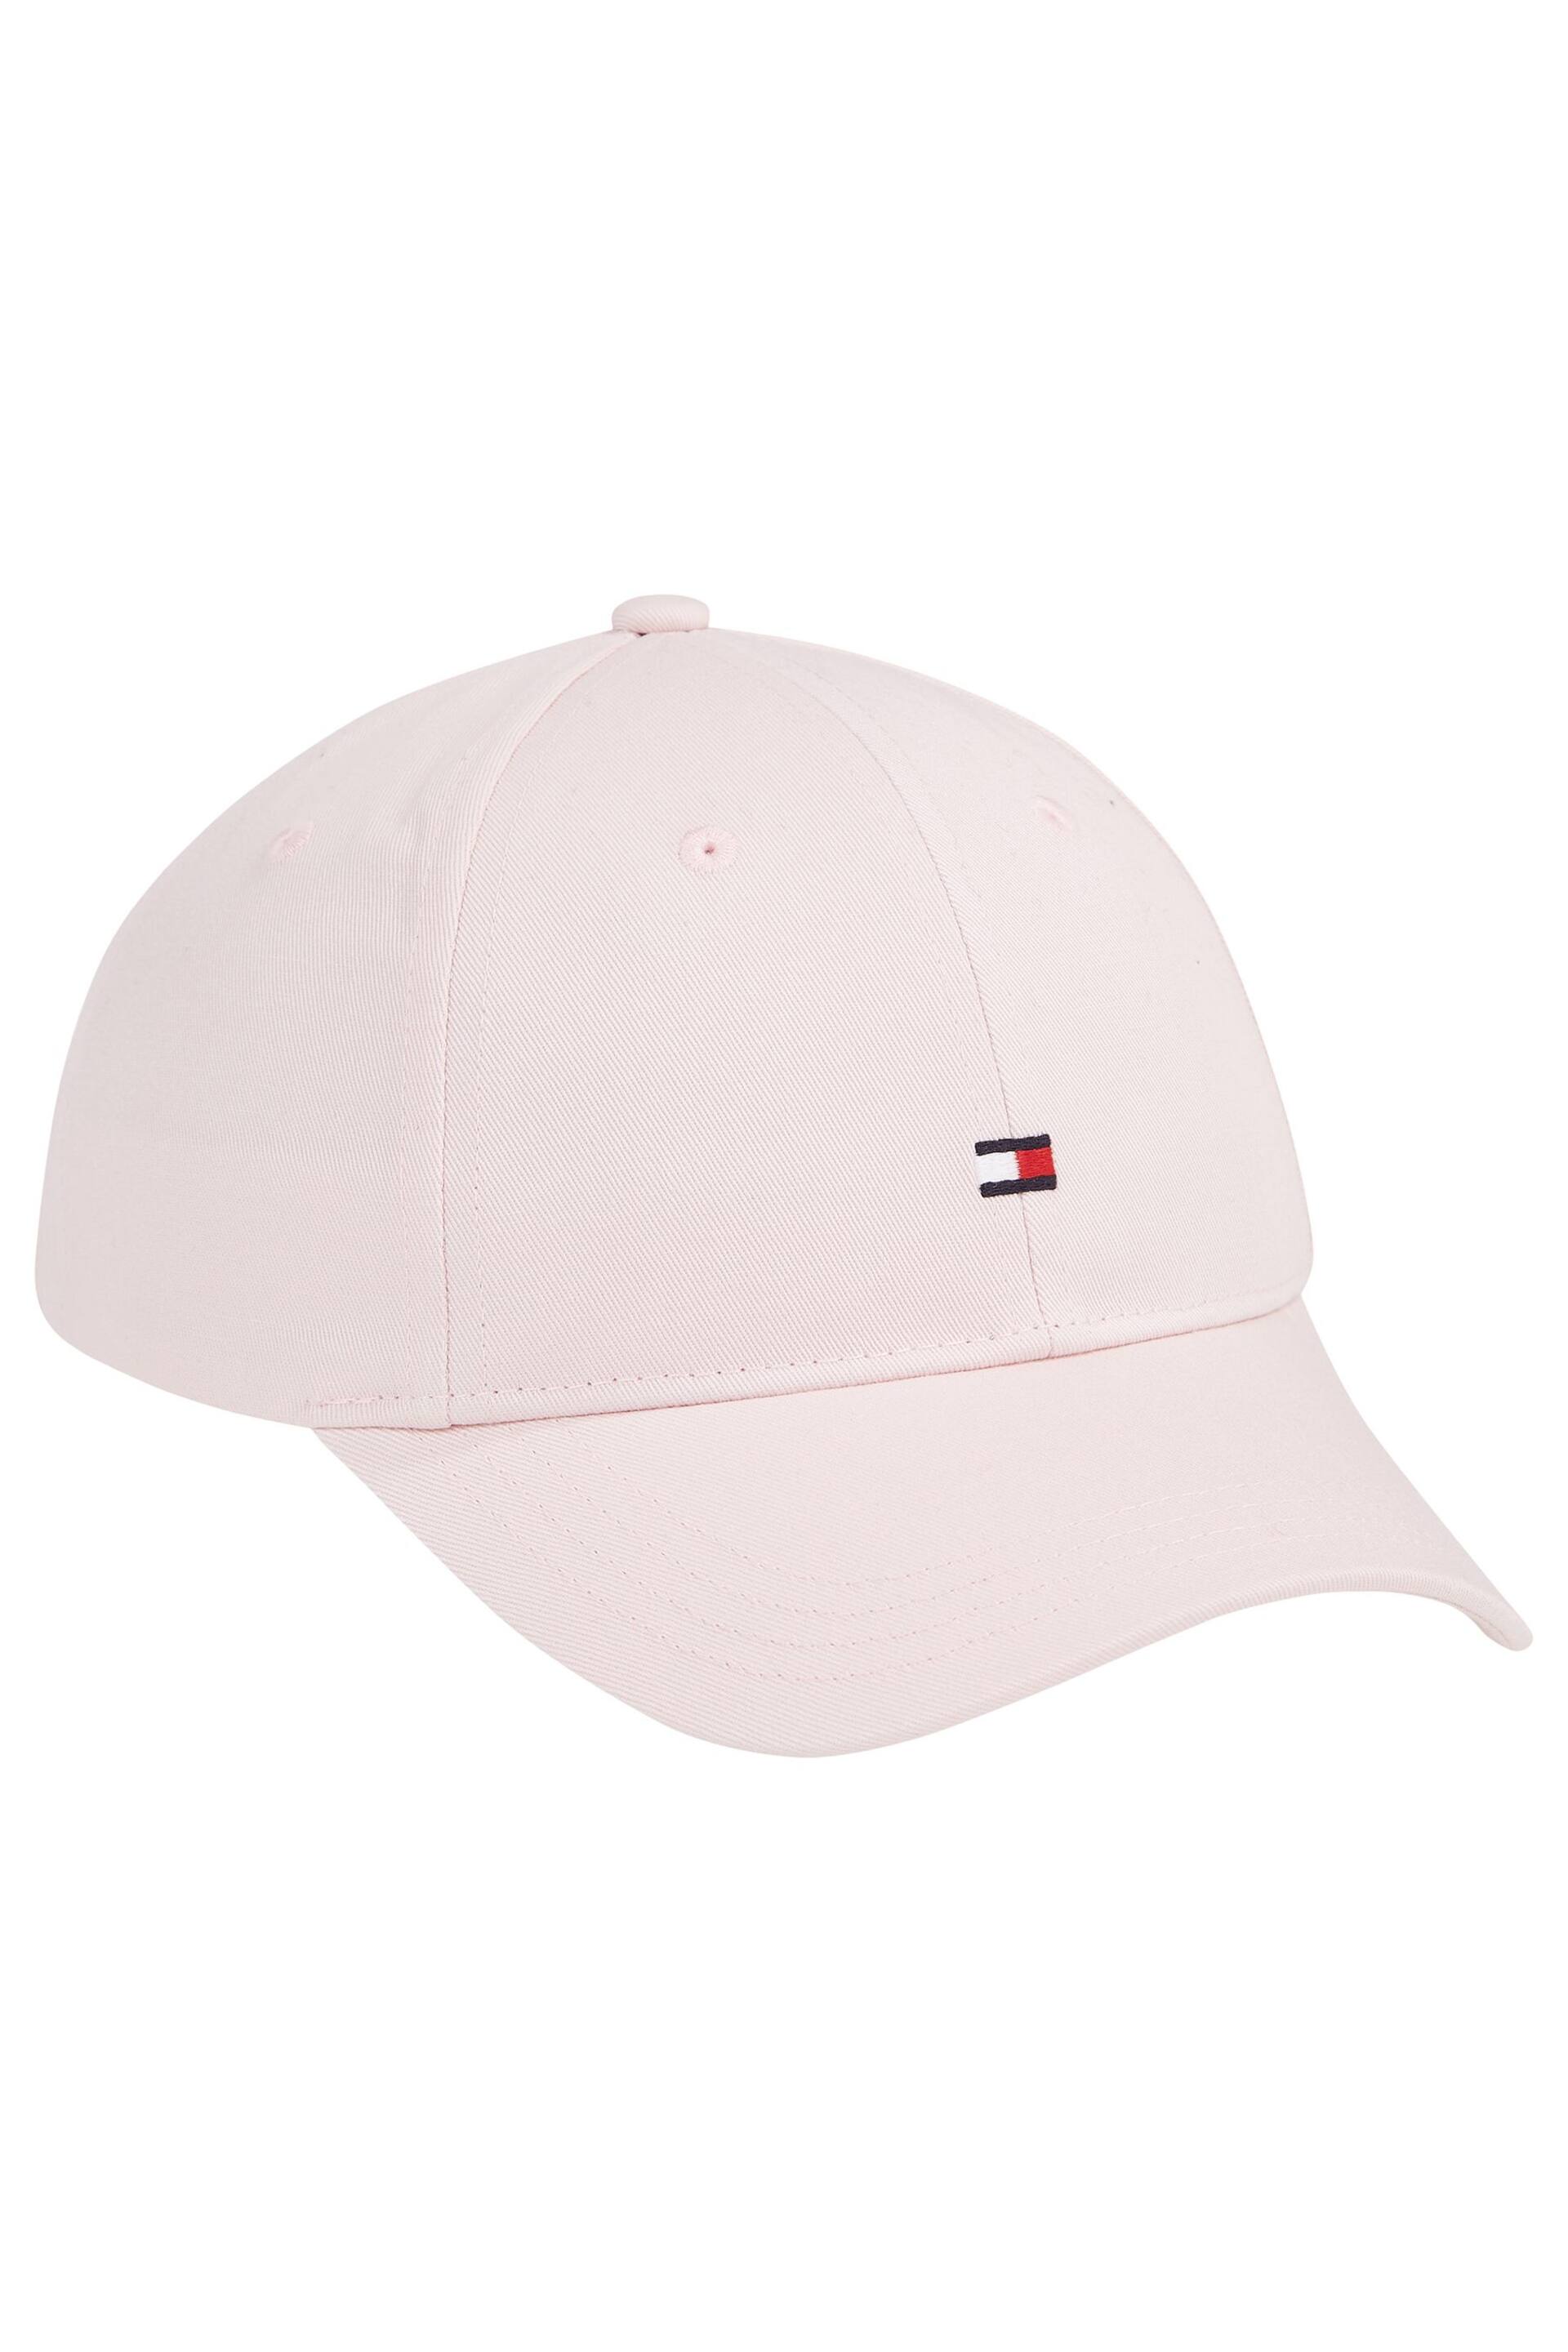 Tommy Hilfiger Pink Small Flag Cap - Image 2 of 4